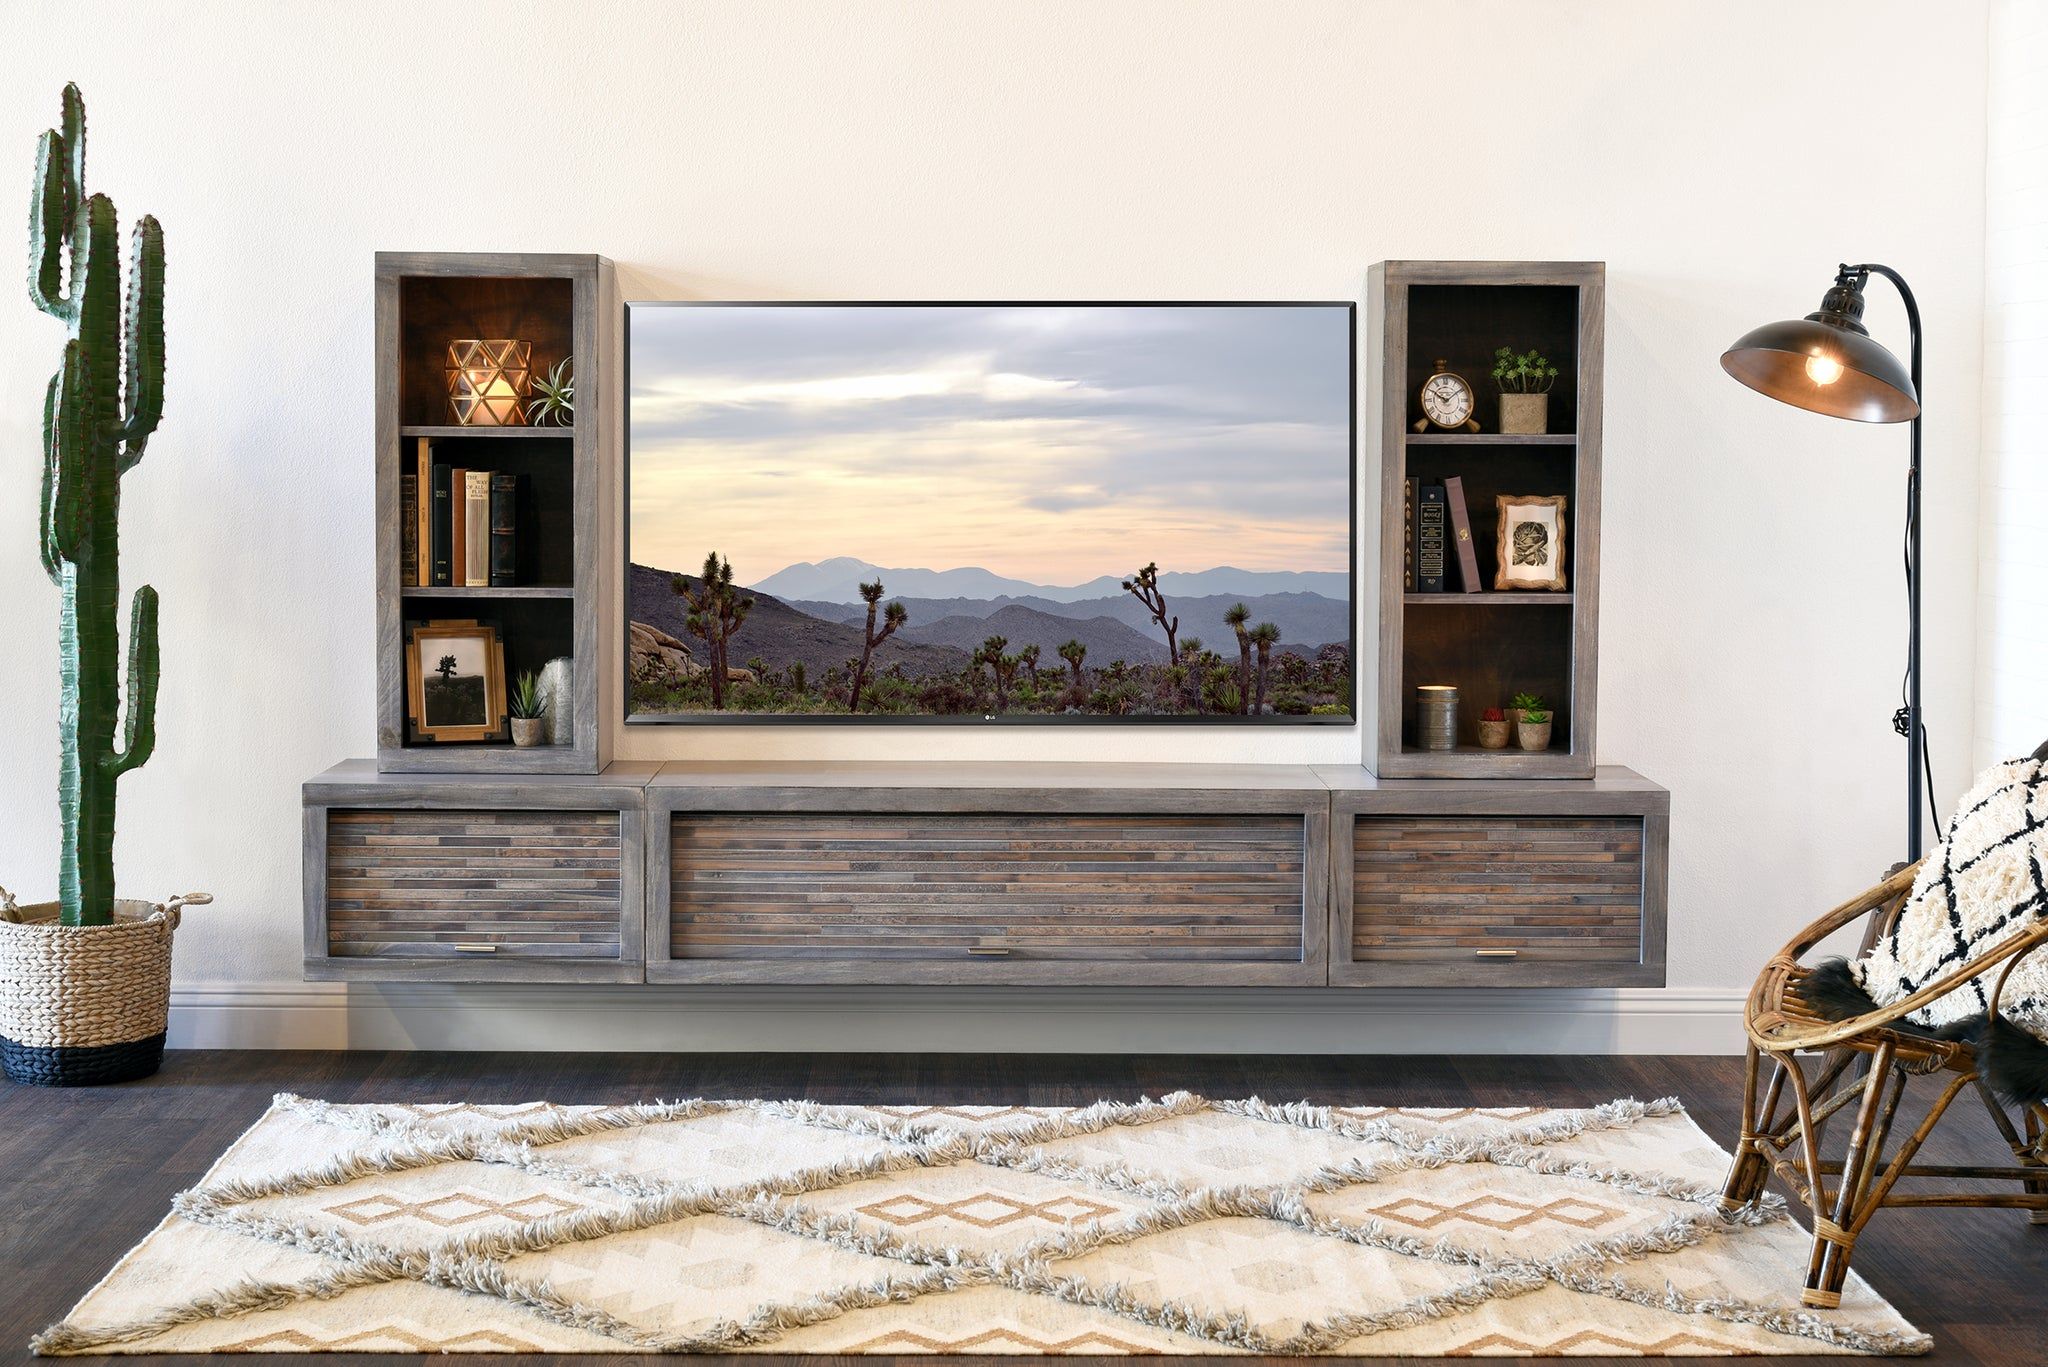 Gray Floating Tv Stand Modern Wall Mount Entertainment Center – Eco Ge Throughout Wall Mounted Floating Tv Stands (Gallery 7 of 20)